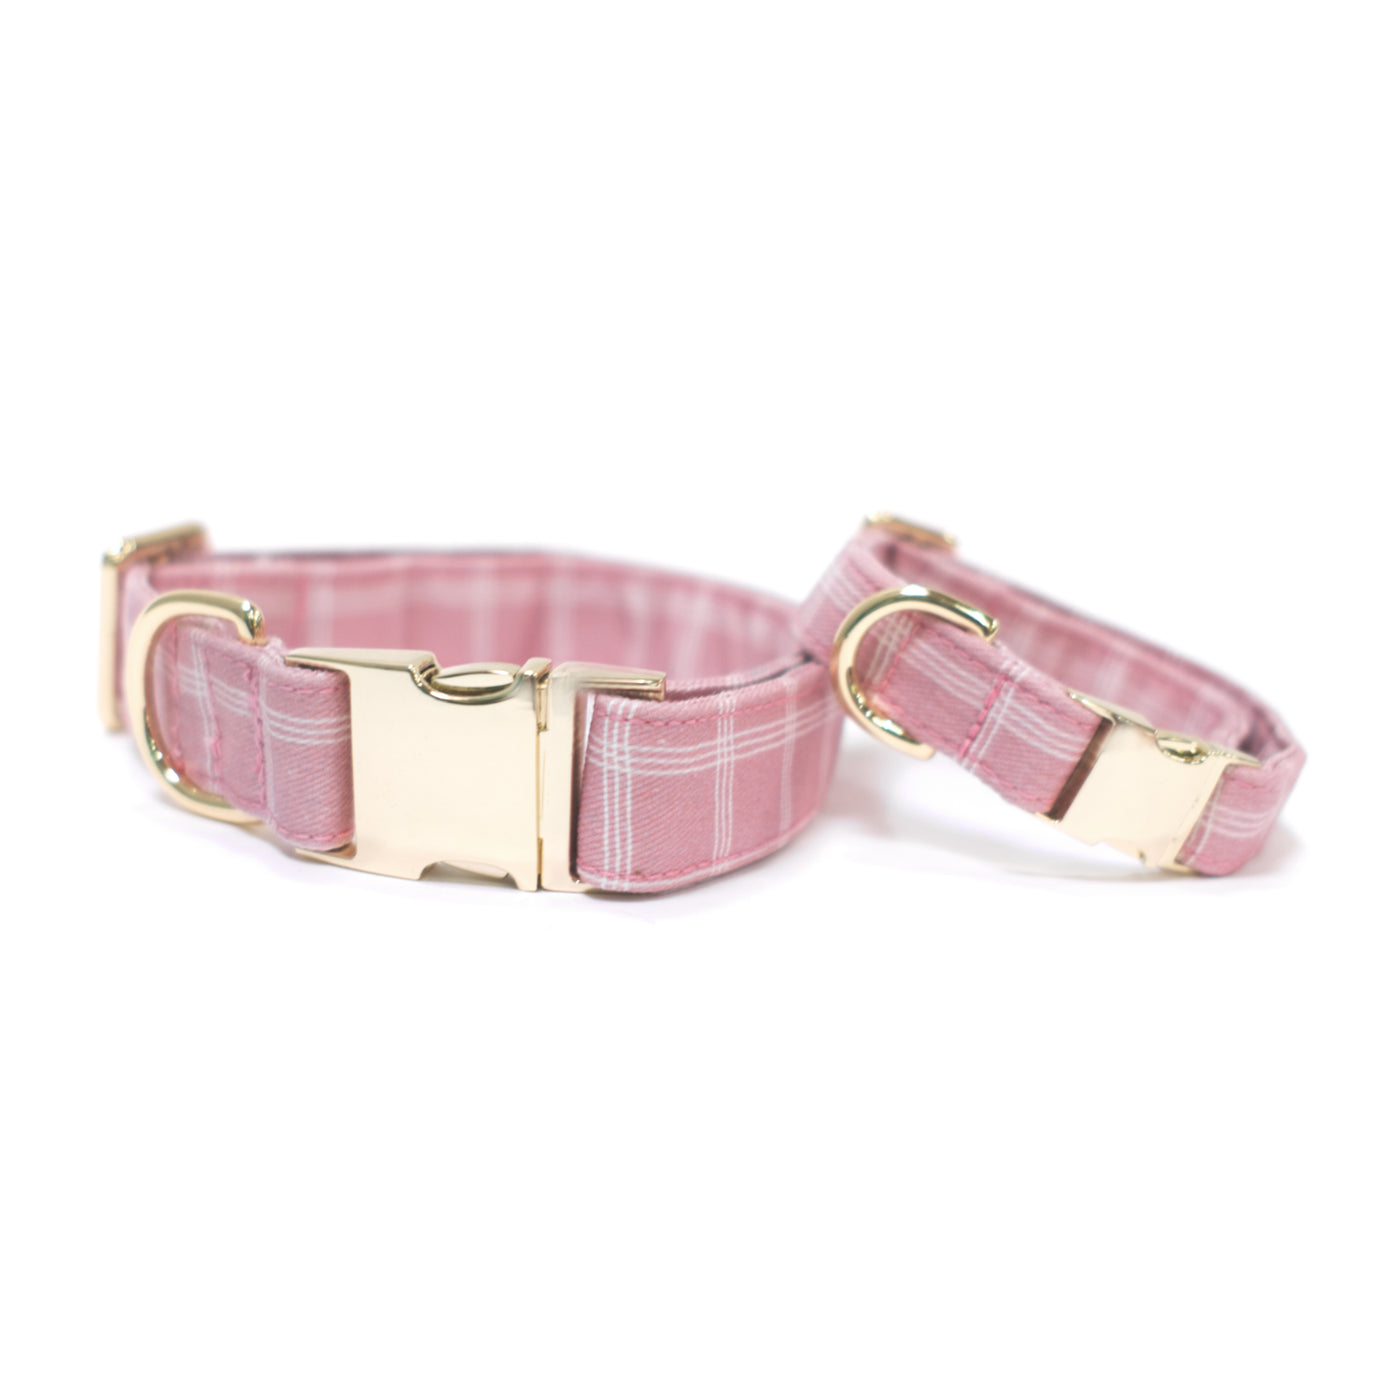 Light pink triple windowpane plaid dog collars with gold hardware in small and large